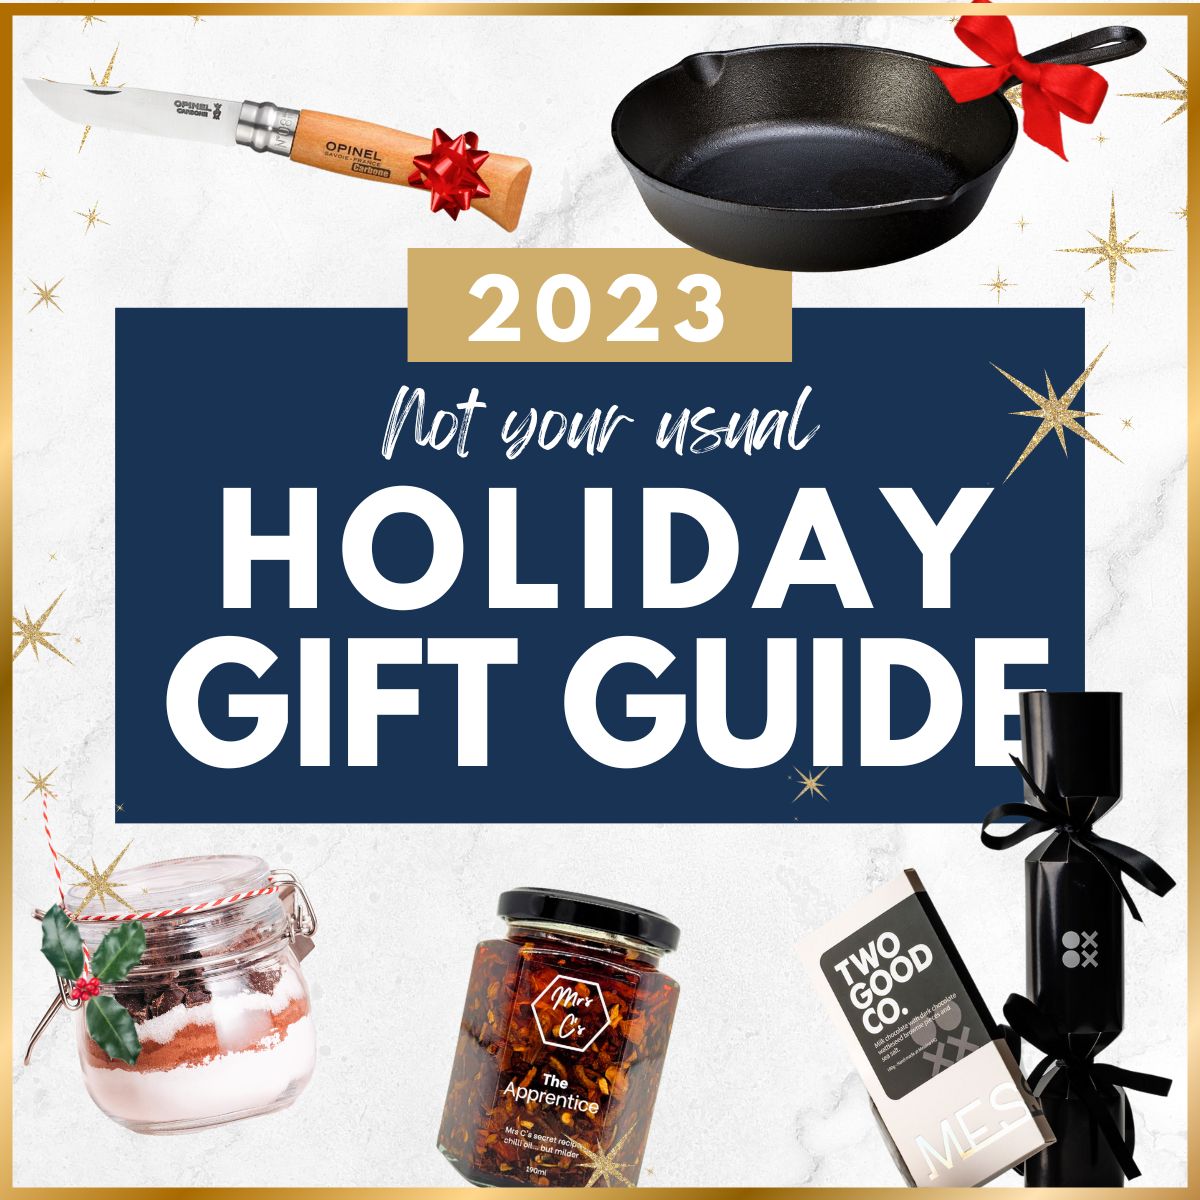 Gluten Free Cook Gift Guide, Hot Pan Kitchen